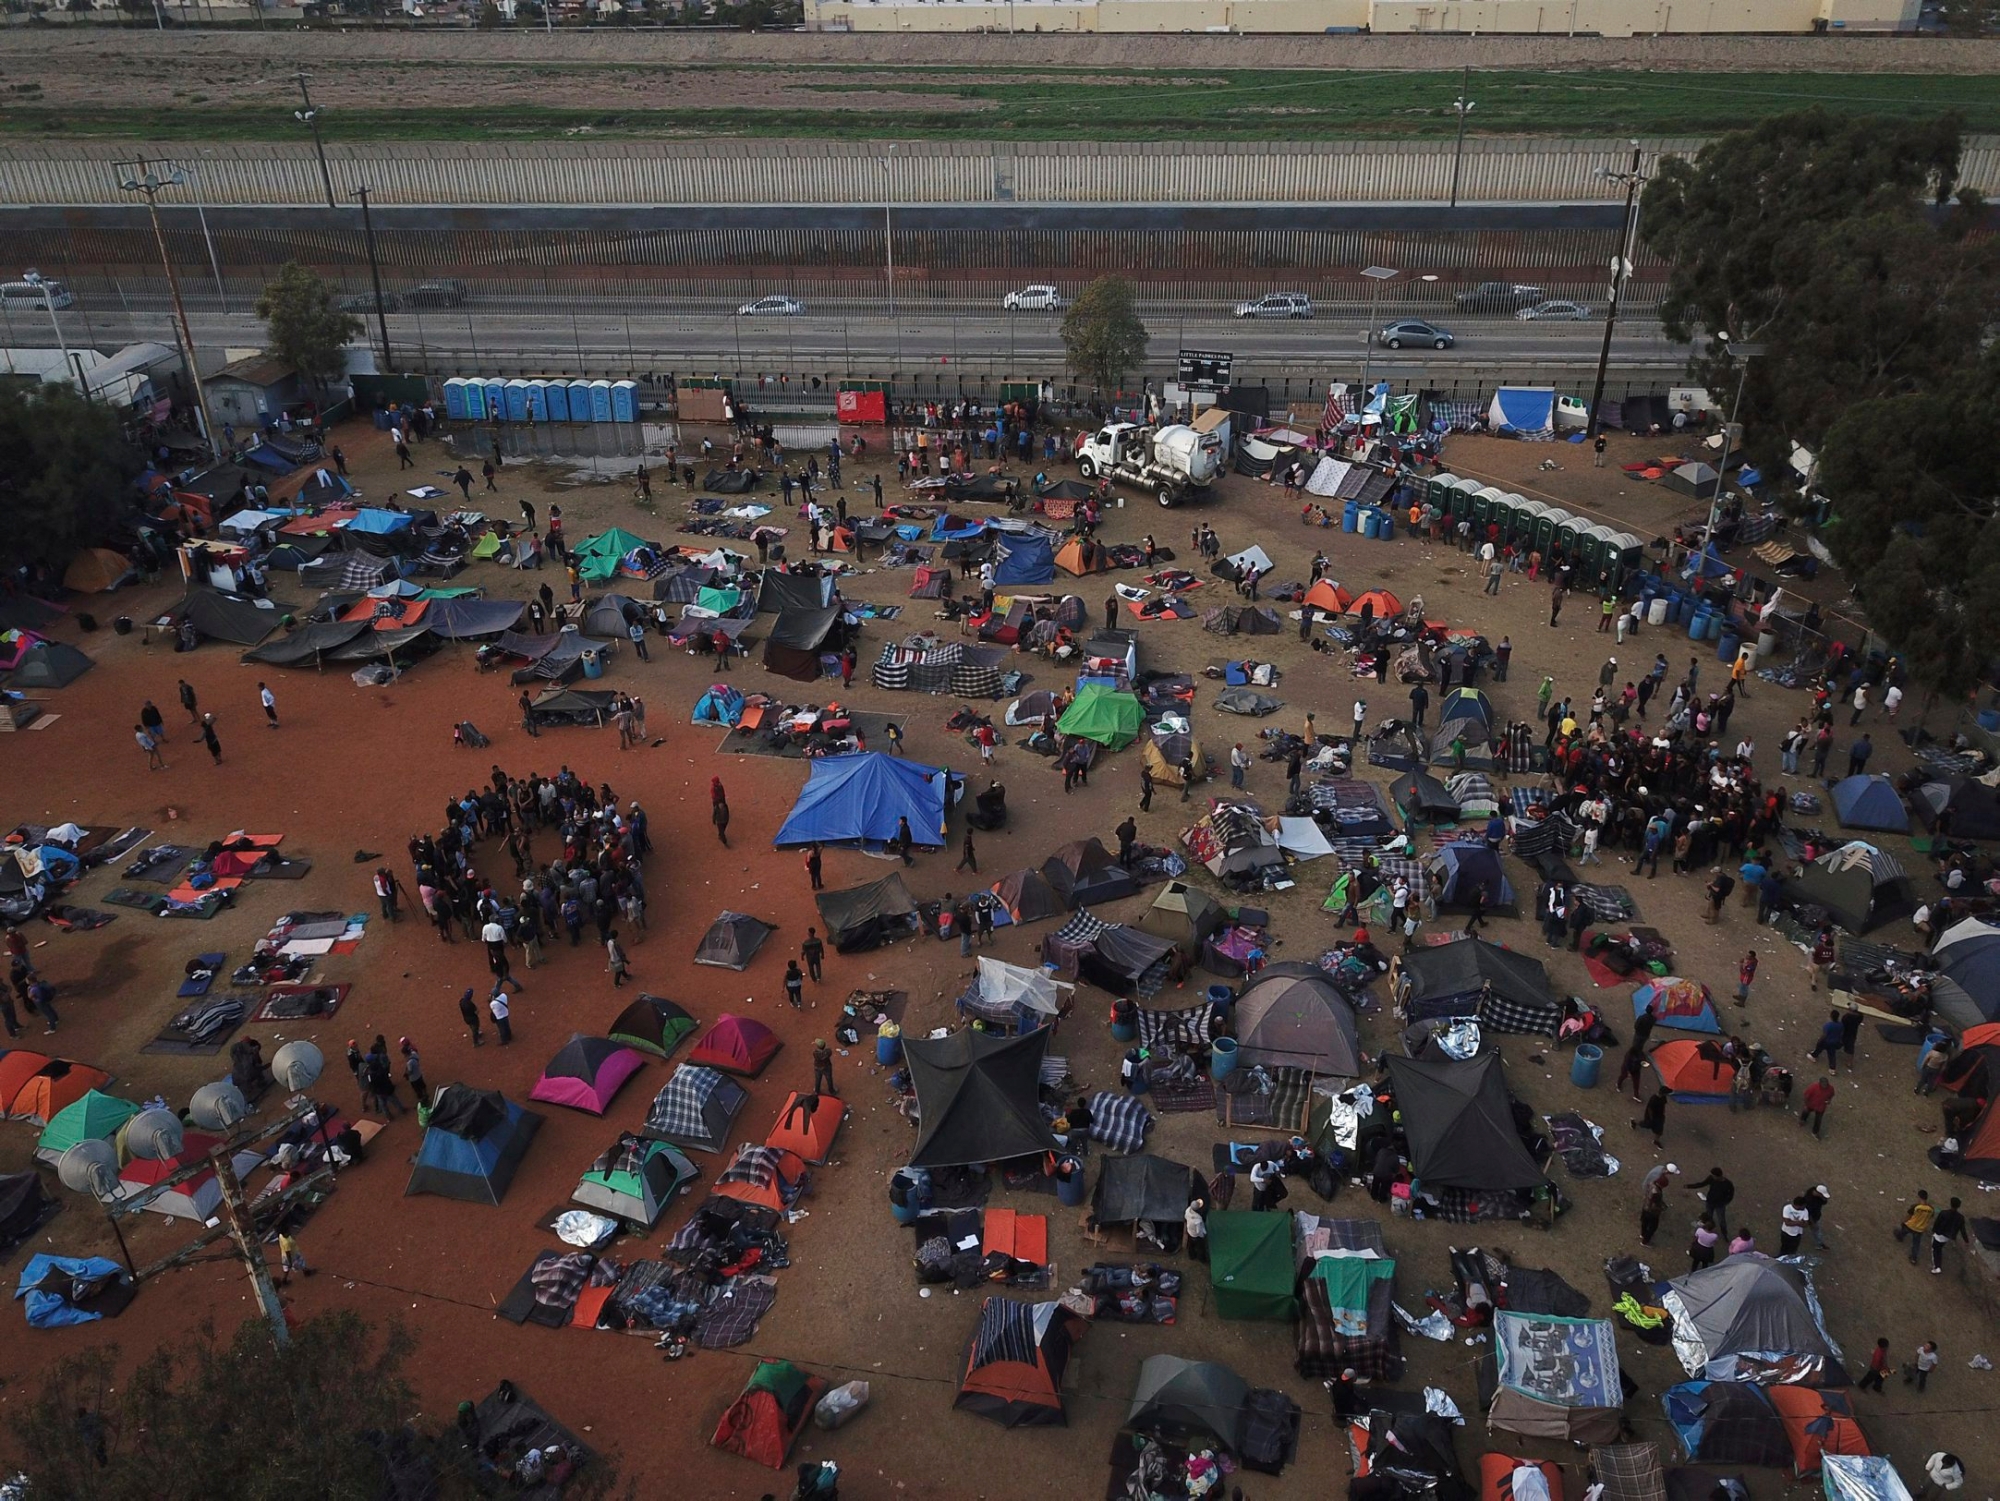 Central American migrants gather at a temporary shelter, near barriers that separate Mexico and the United States, in Tijuana, Mexico, Wednesday, Nov. 21, 2018. Migrants camped in Tijuana after traveling in a caravan to reach the U.S are weighing their options after a U.S. court blocked President Donald Trump's asylum ban for illegal border crossers. (AP Photo/Rodrigo Abd) Central America Migrant Caravan